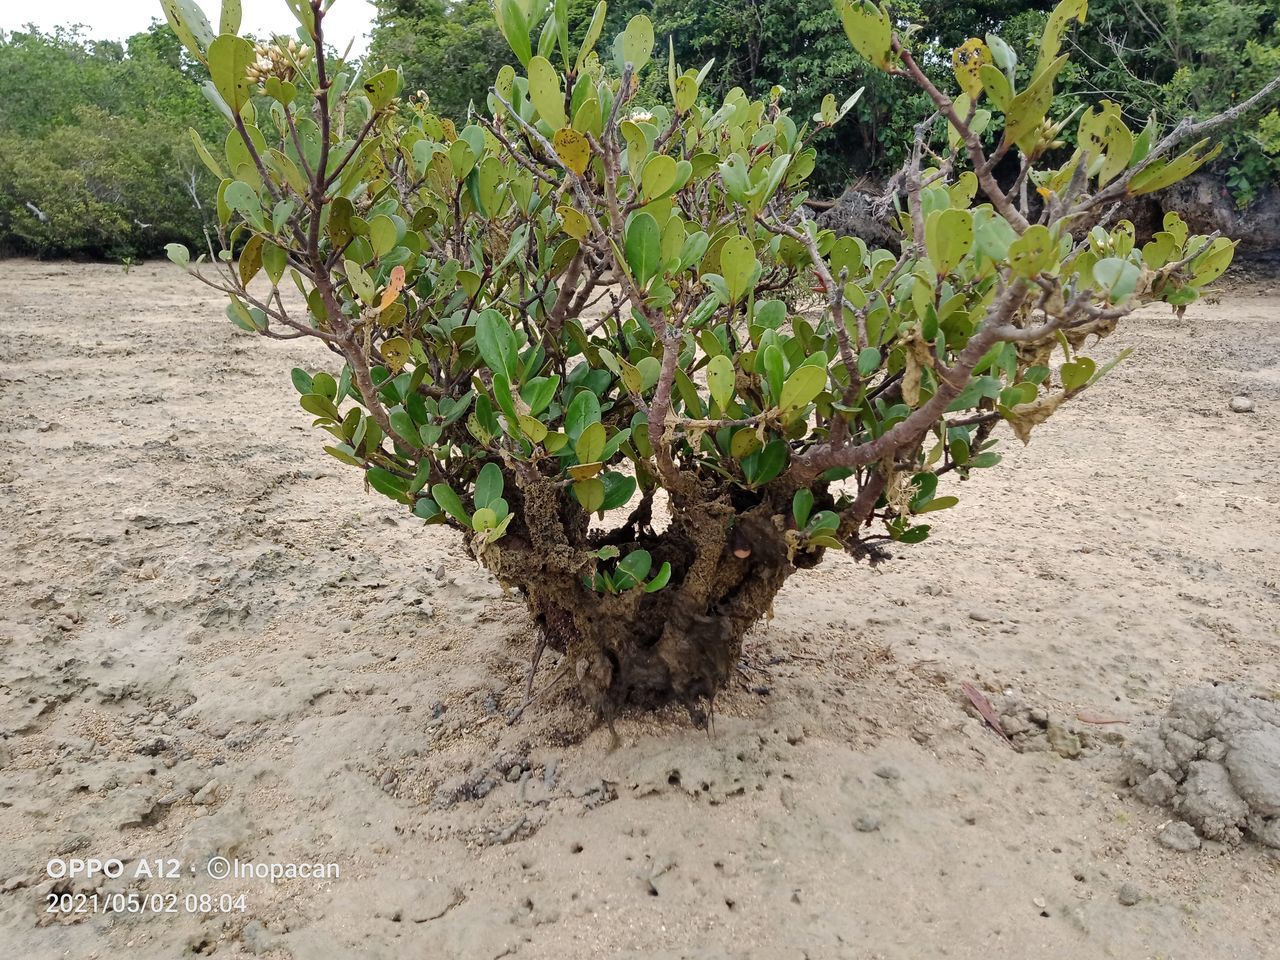 plant, growth, produce, nature, soil, tree, food, land, no people, day, green, shrub, field, outdoors, beauty in nature, landscape, food and drink, agriculture, leaf, flower, plant part, dirt, environment, fruit, tranquility, healthy eating, scenics - nature, sand, sunlight